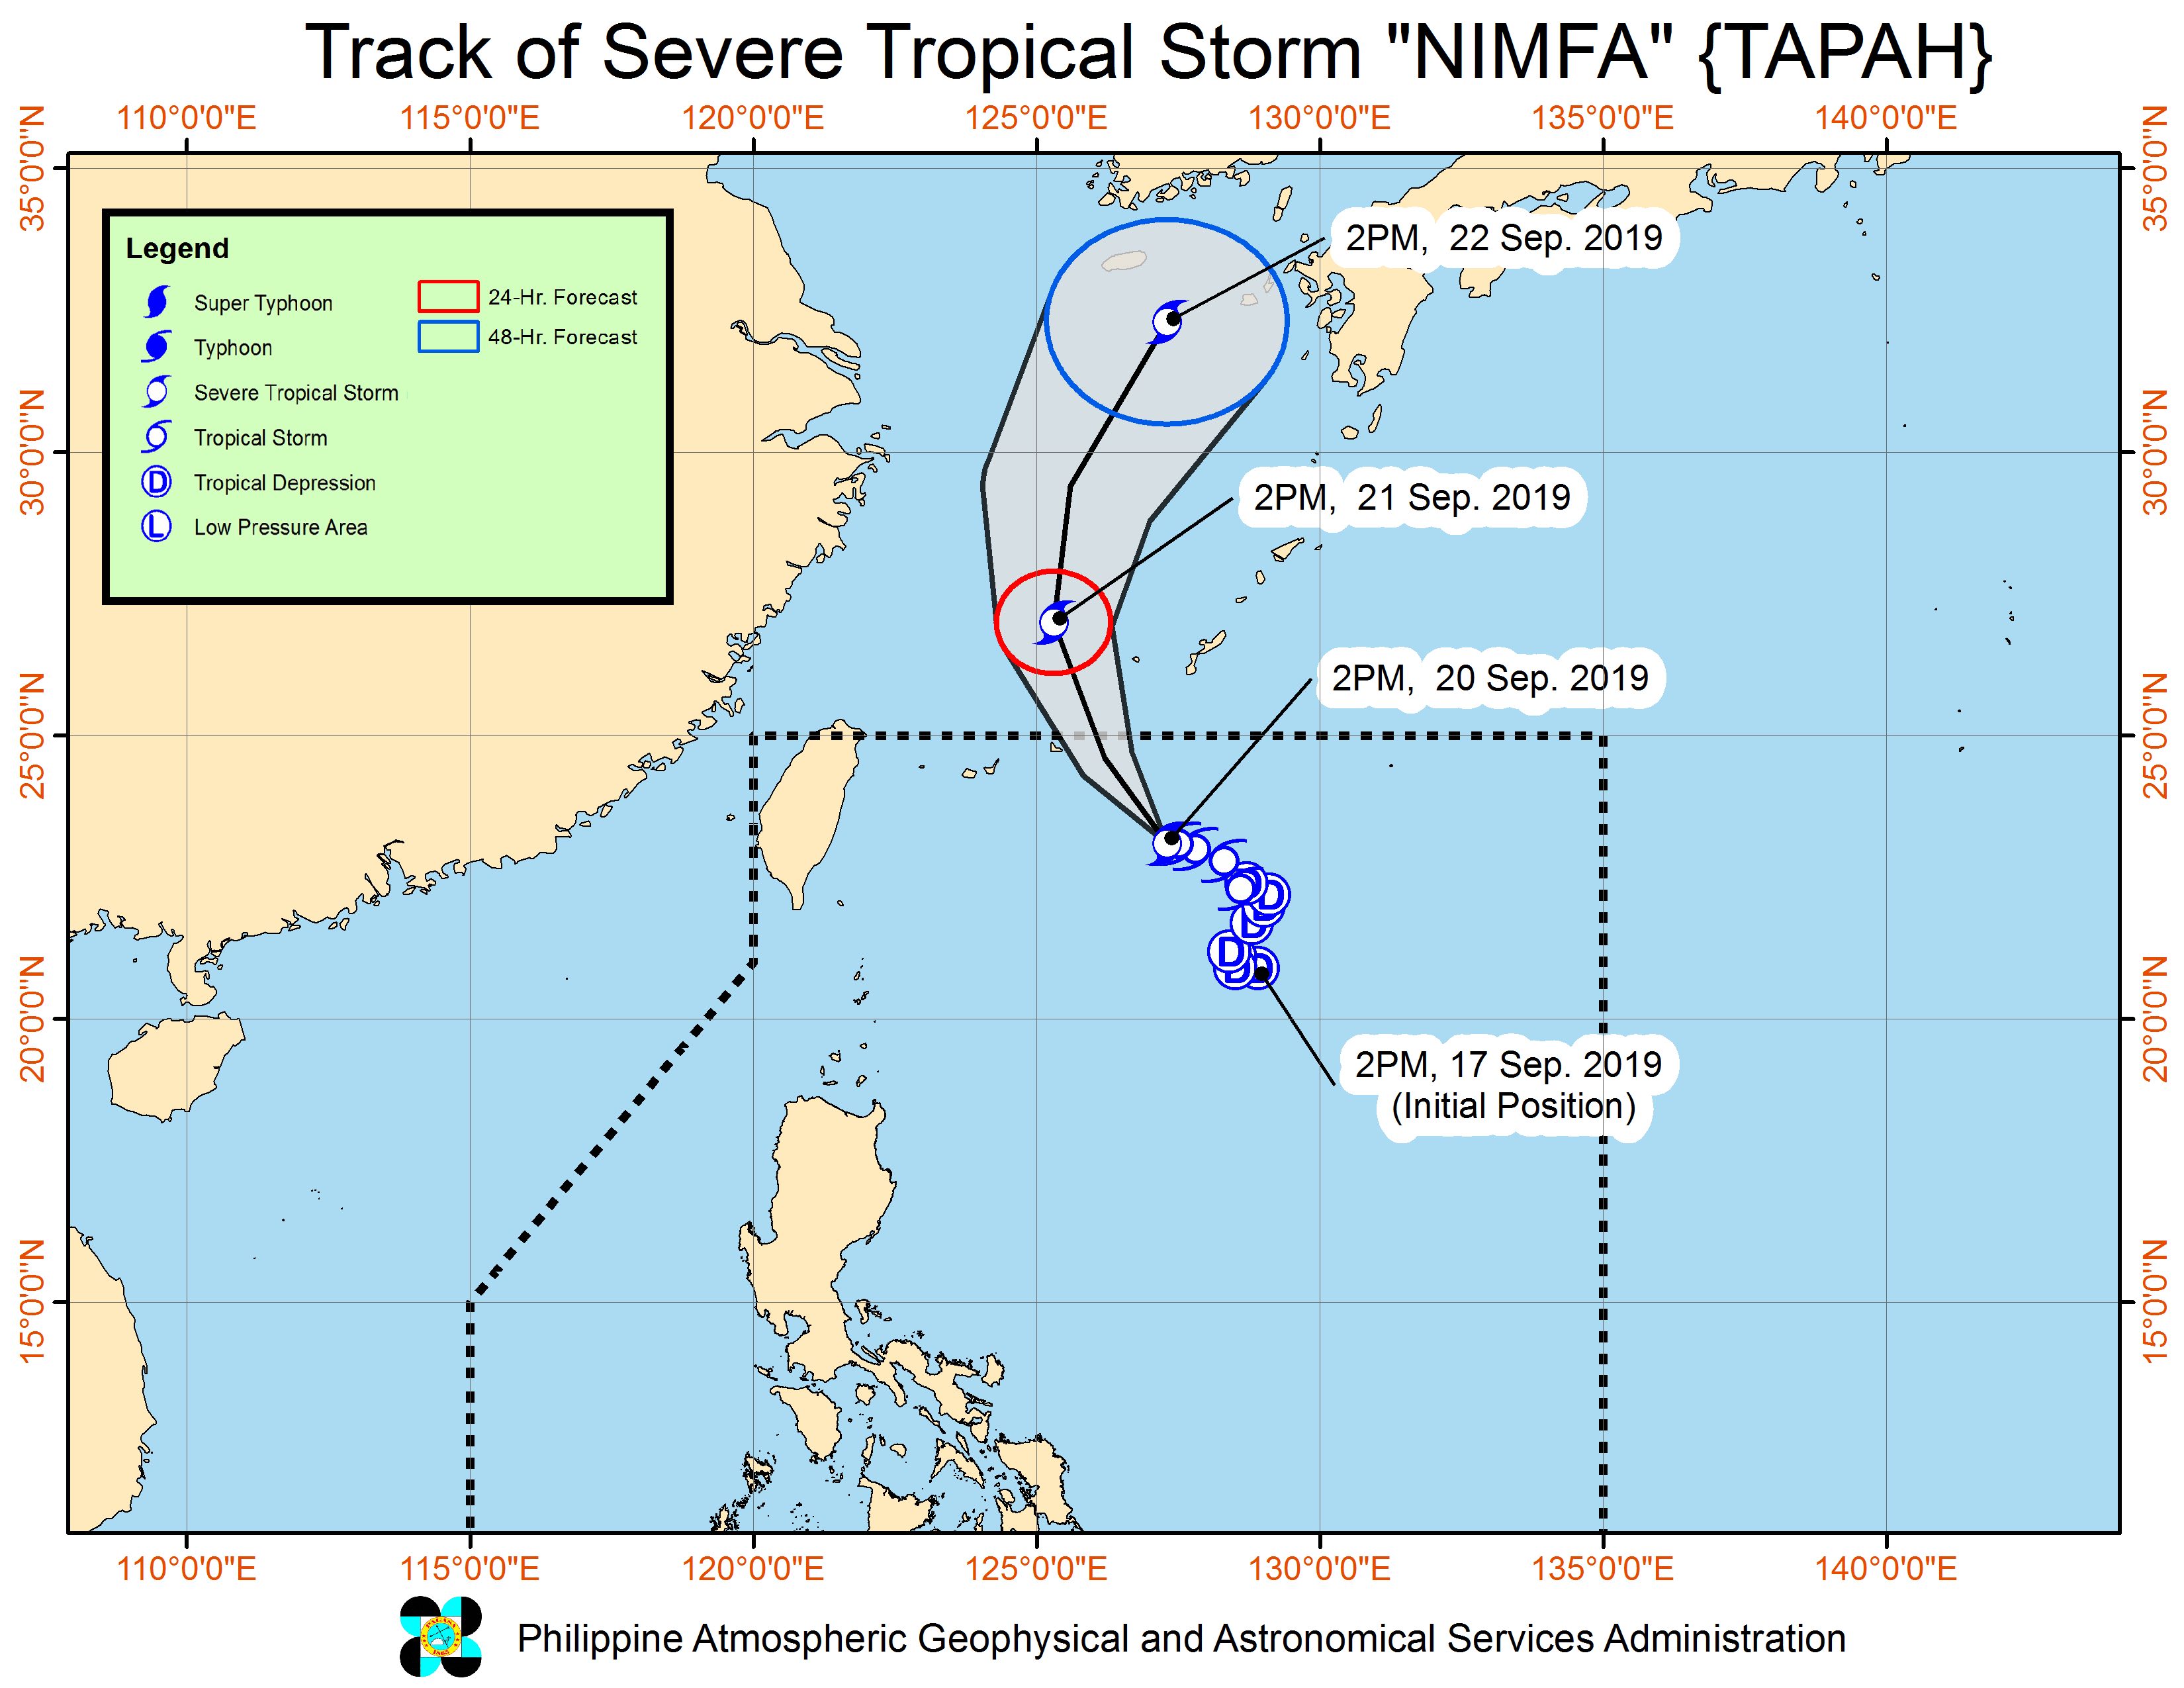 Forecast track of Severe Tropical Storm Nimfa (Tapah) as of September 20, 2019, 5 pm. Image from PAGASA 